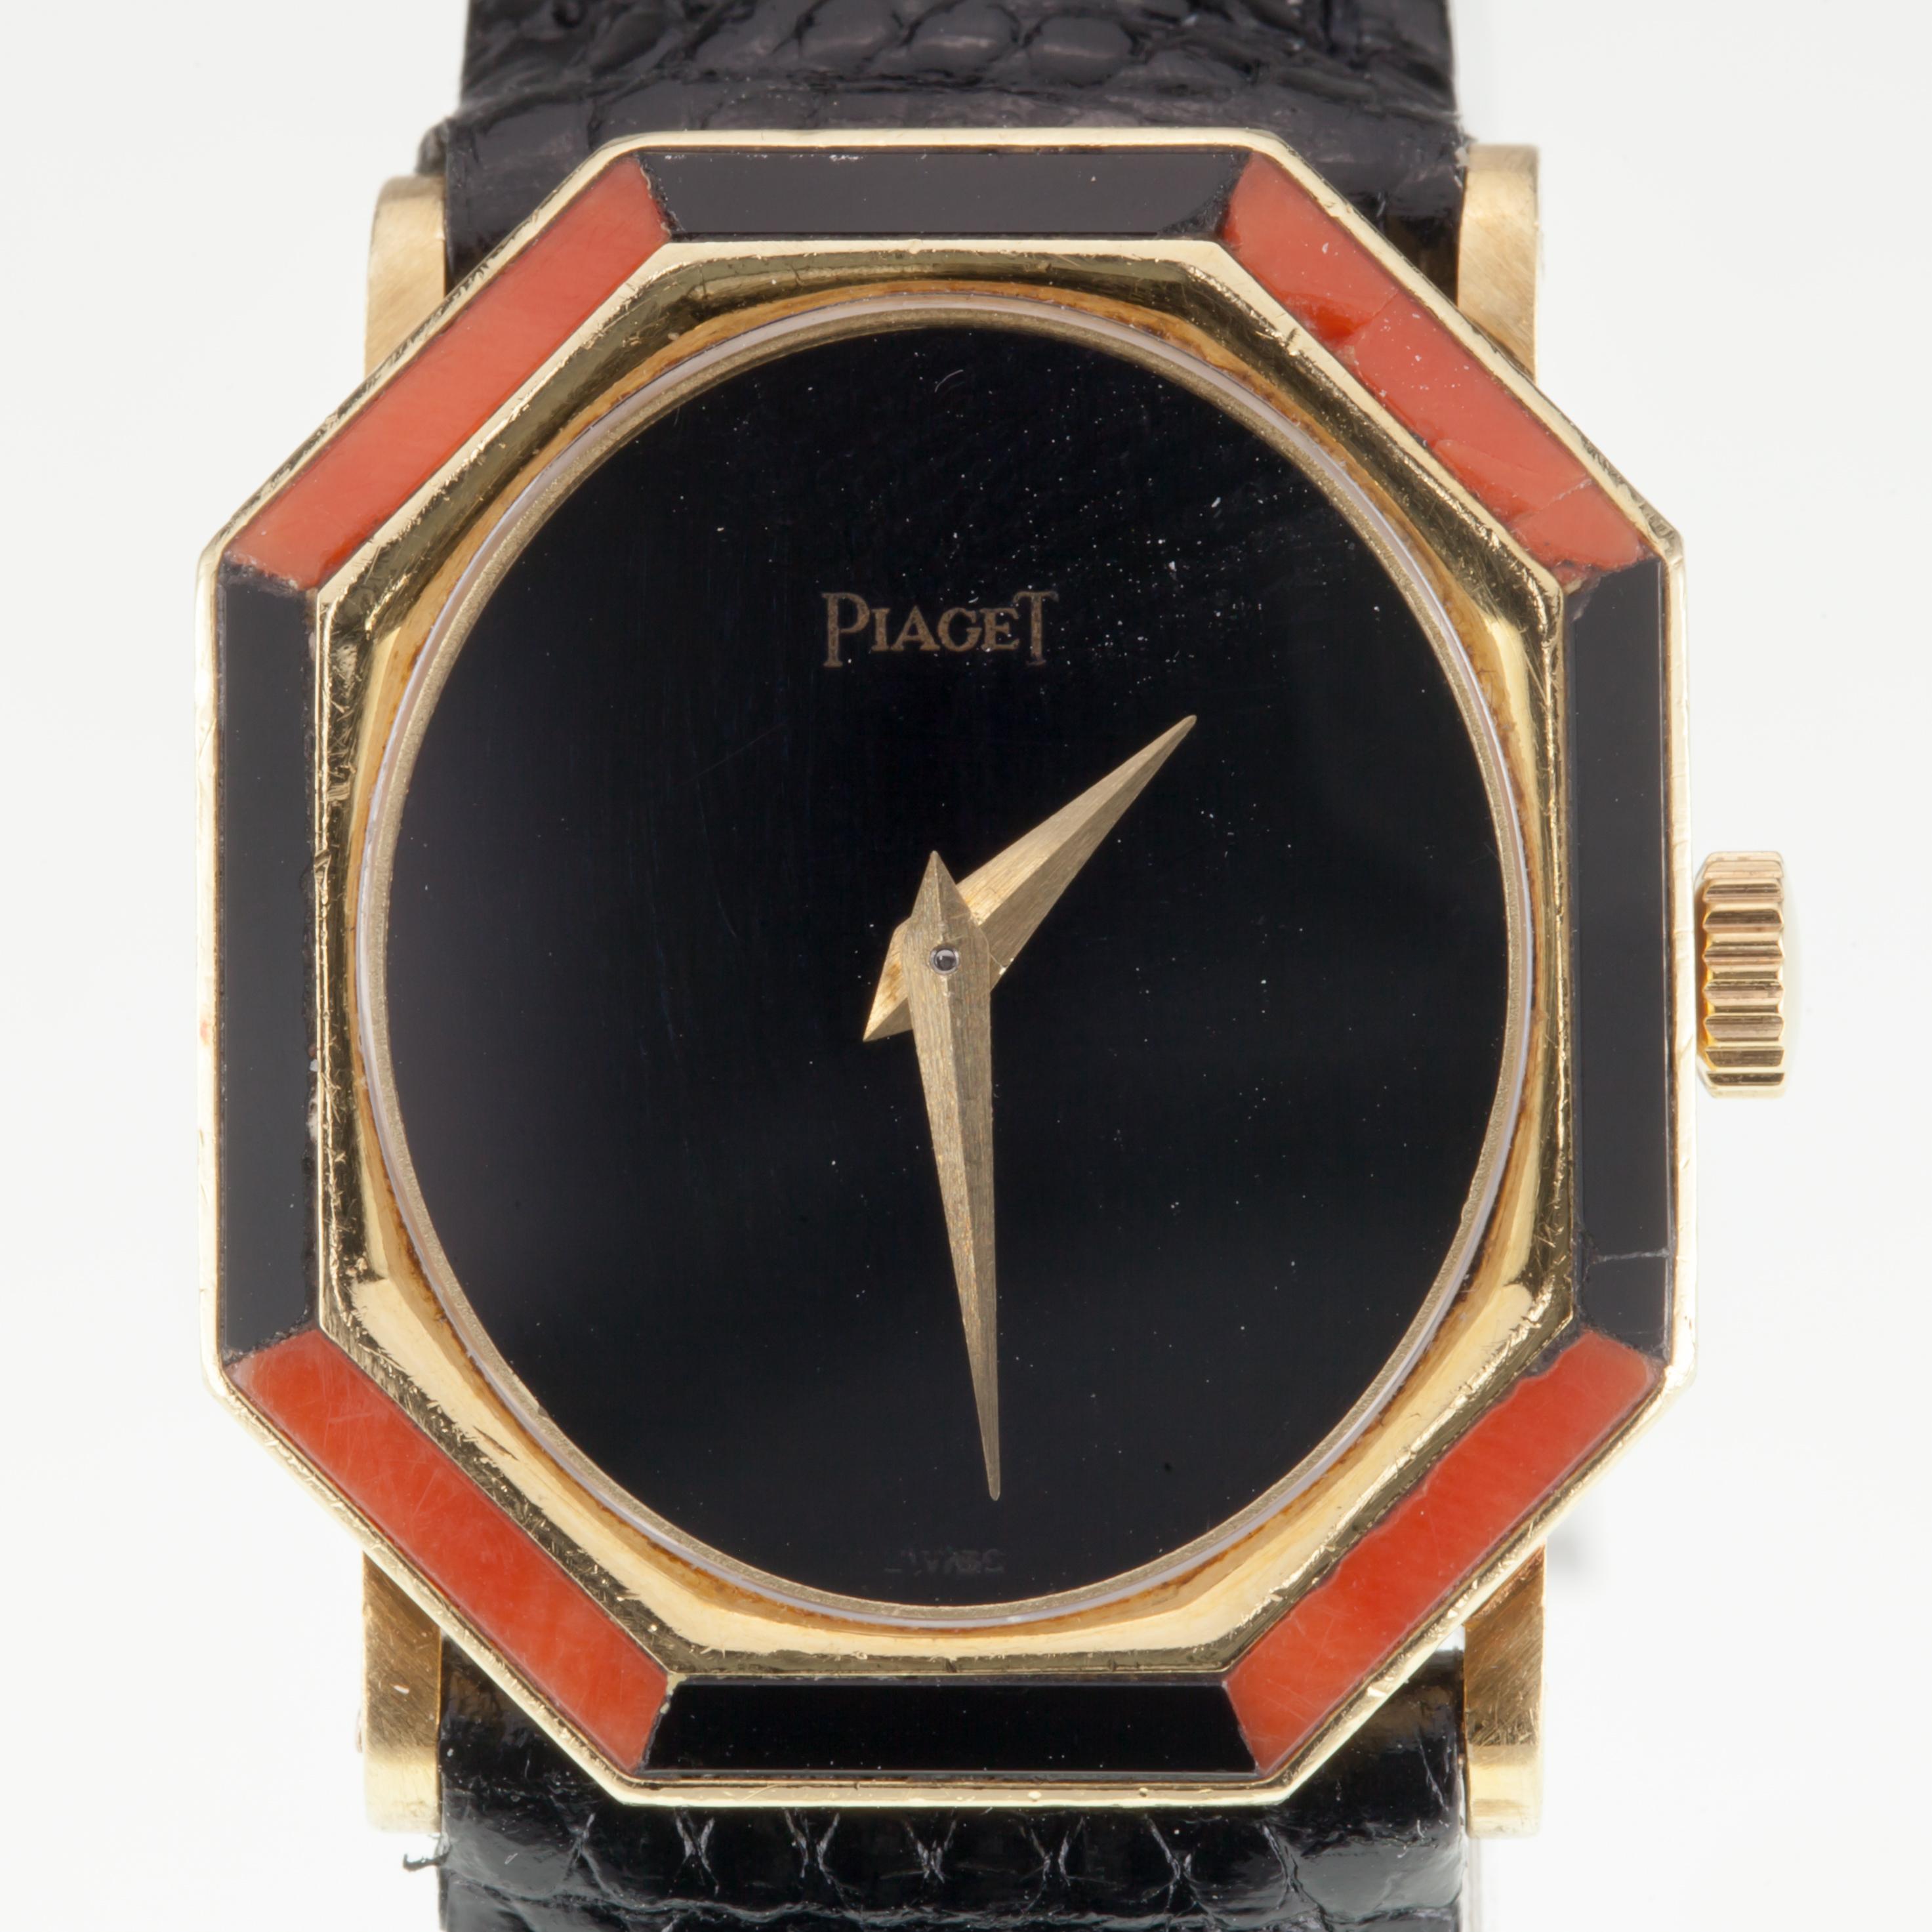 Piaget Women's 18k Yellow Gold Onyx & Coral Women's Mechanical Watch 9341 w/ Box
Model #9341
Serial #227111
18-Jewel Movement #9PI
Movement Serial #7312311
18k Yellow Gold Case w/ Custom-Cut Onyx and Coral-Set Bezel
NOTE: Minor Cracking in Coral on